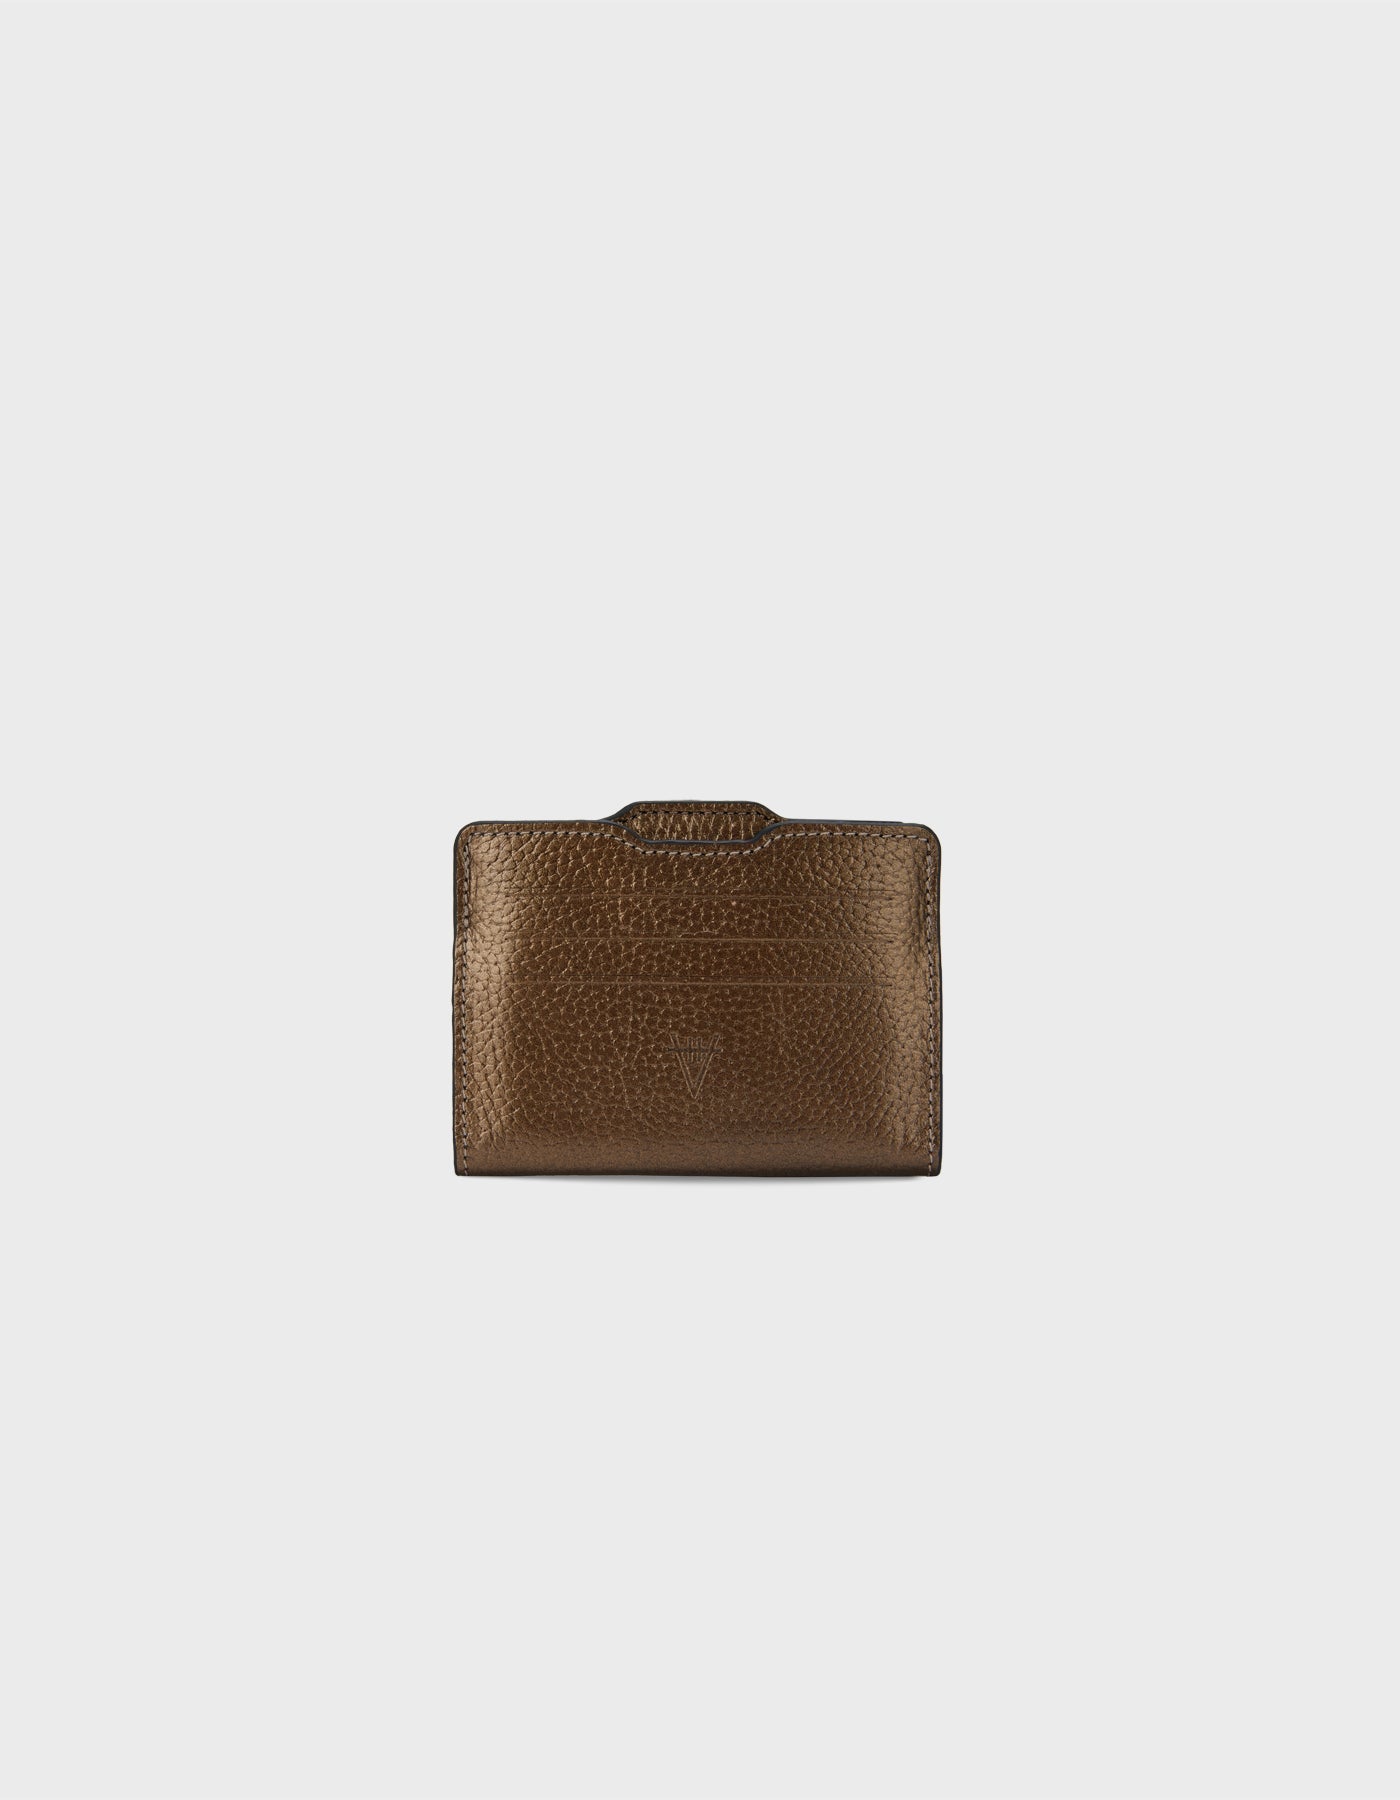 Double Card Holder - Finest Quality HiVa Atelier GmbH Leather Accessories